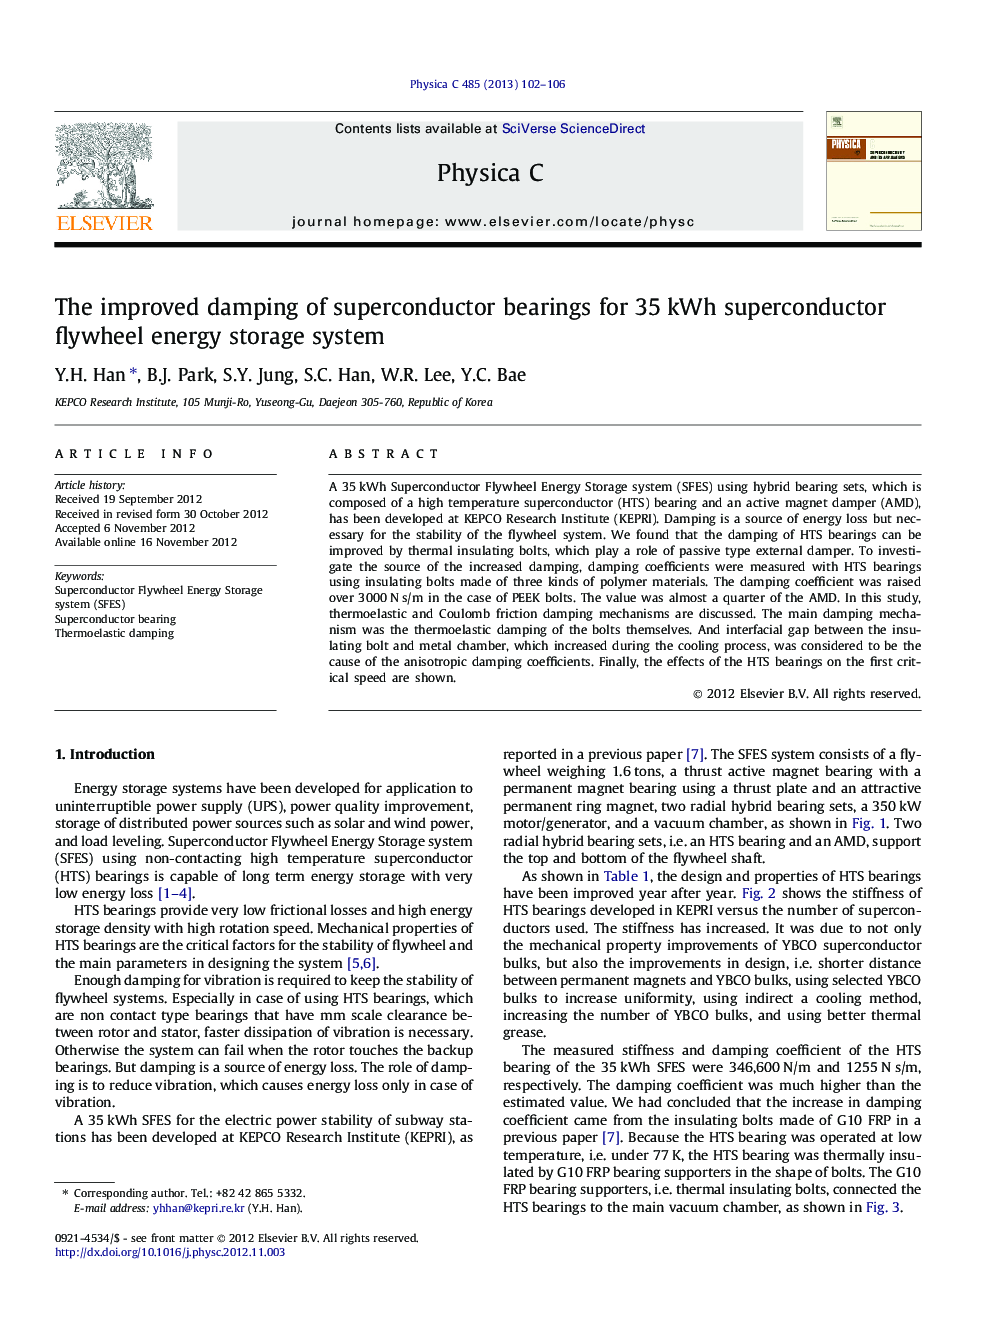 The improved damping of superconductor bearings for 35Â kWh superconductor flywheel energy storage system